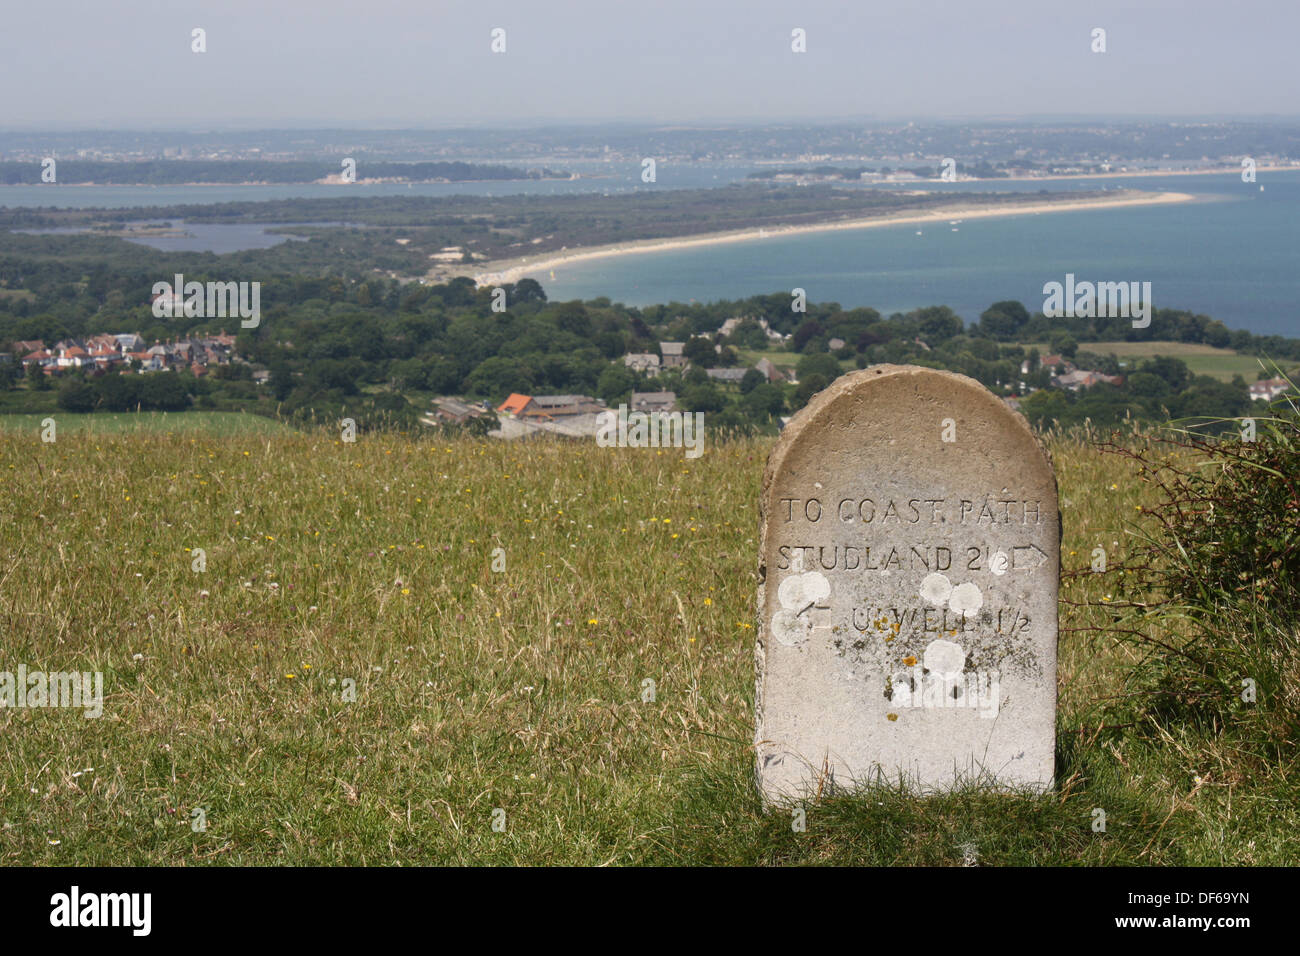 View from Ballard Down across Studland beach to Poole in the distance Stock Photo